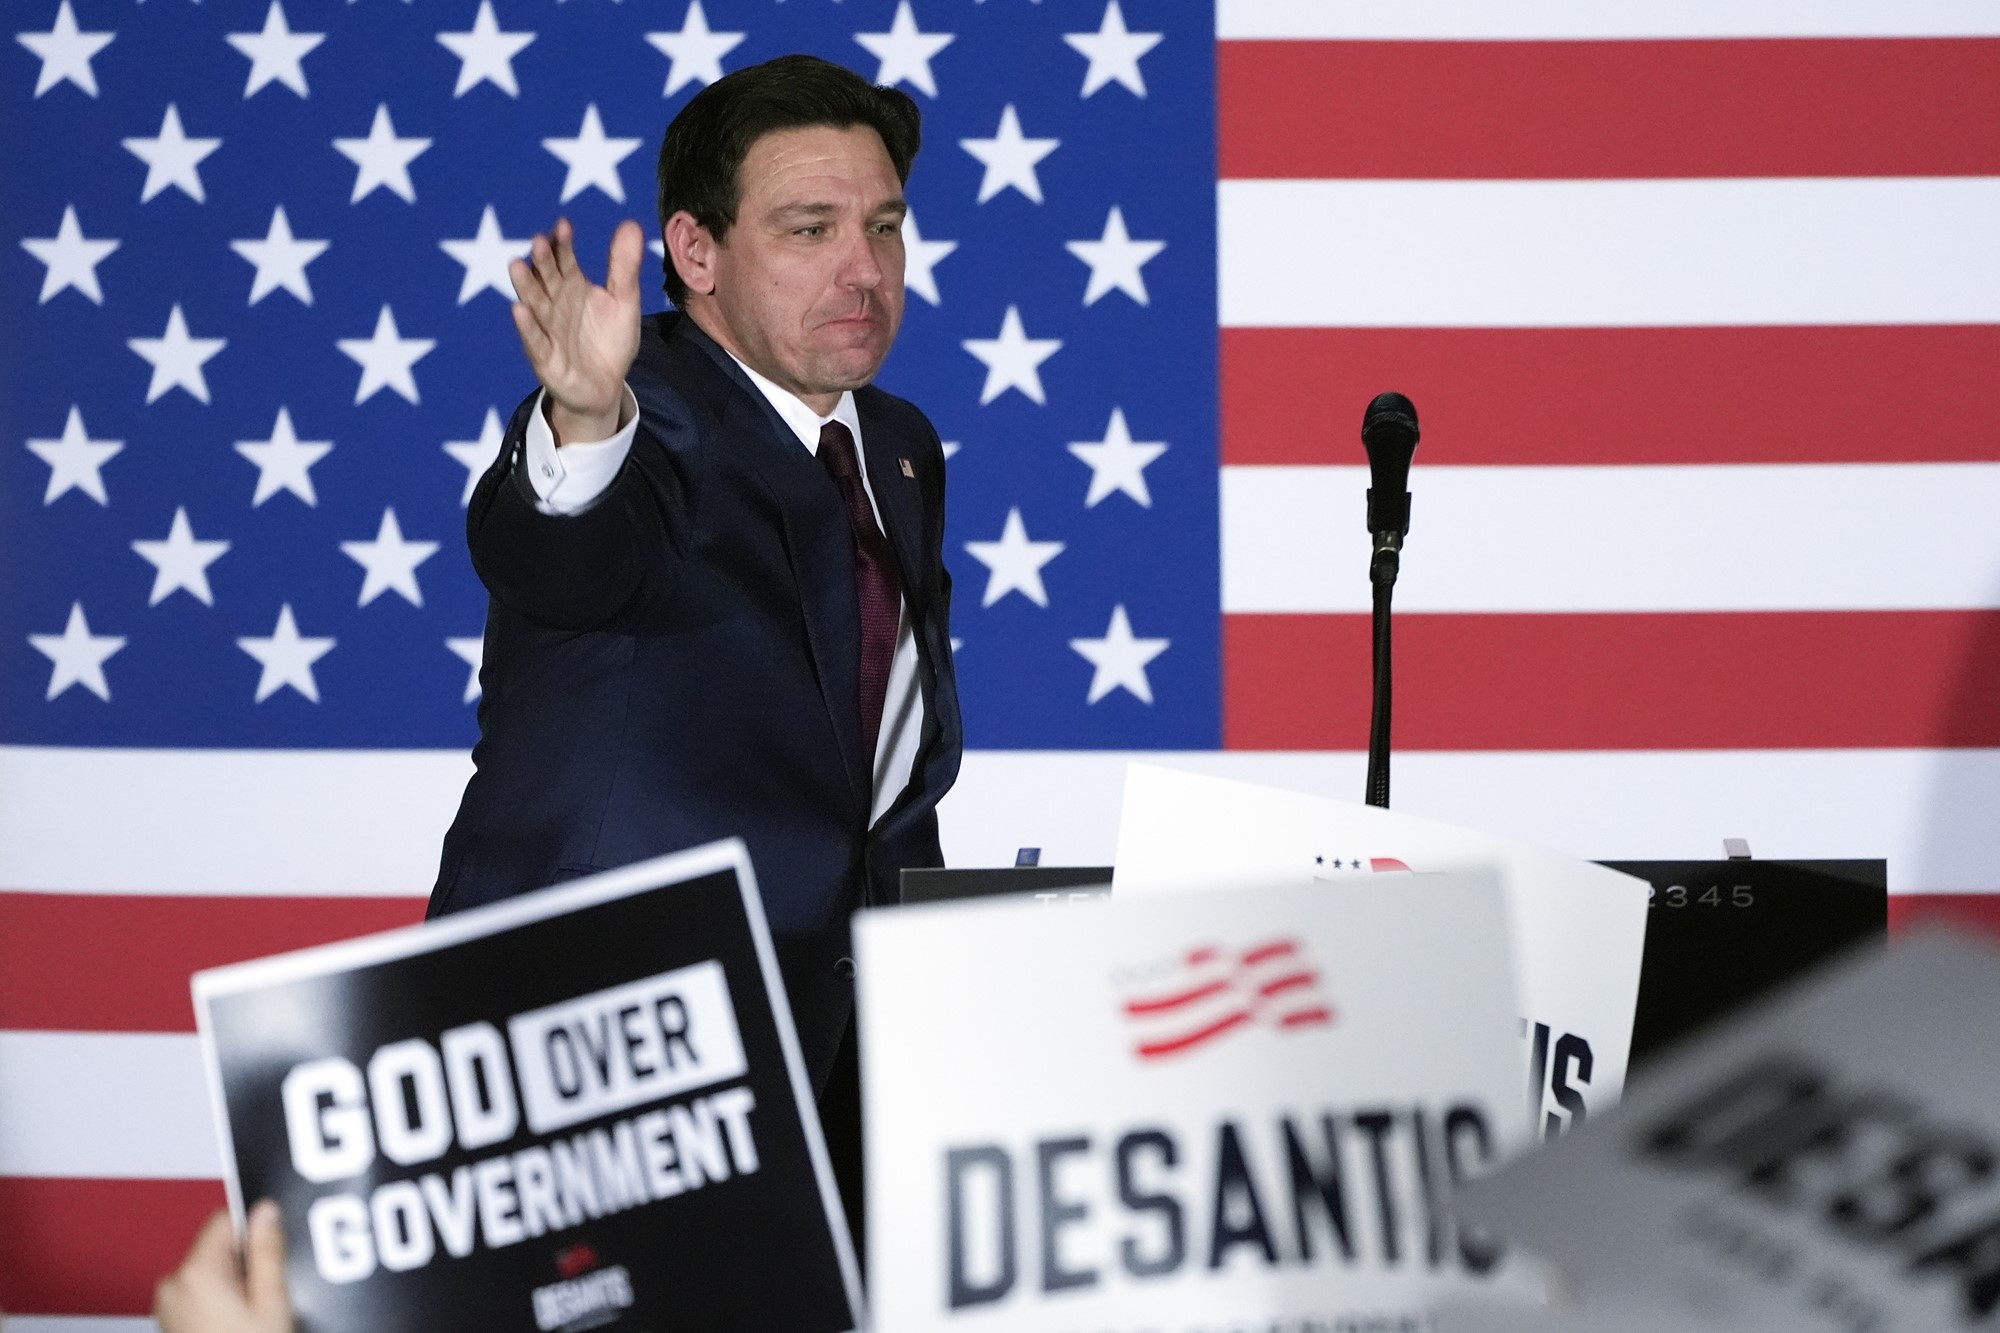 Ron Desantis on stage waving to supporters in front of a United States flag.